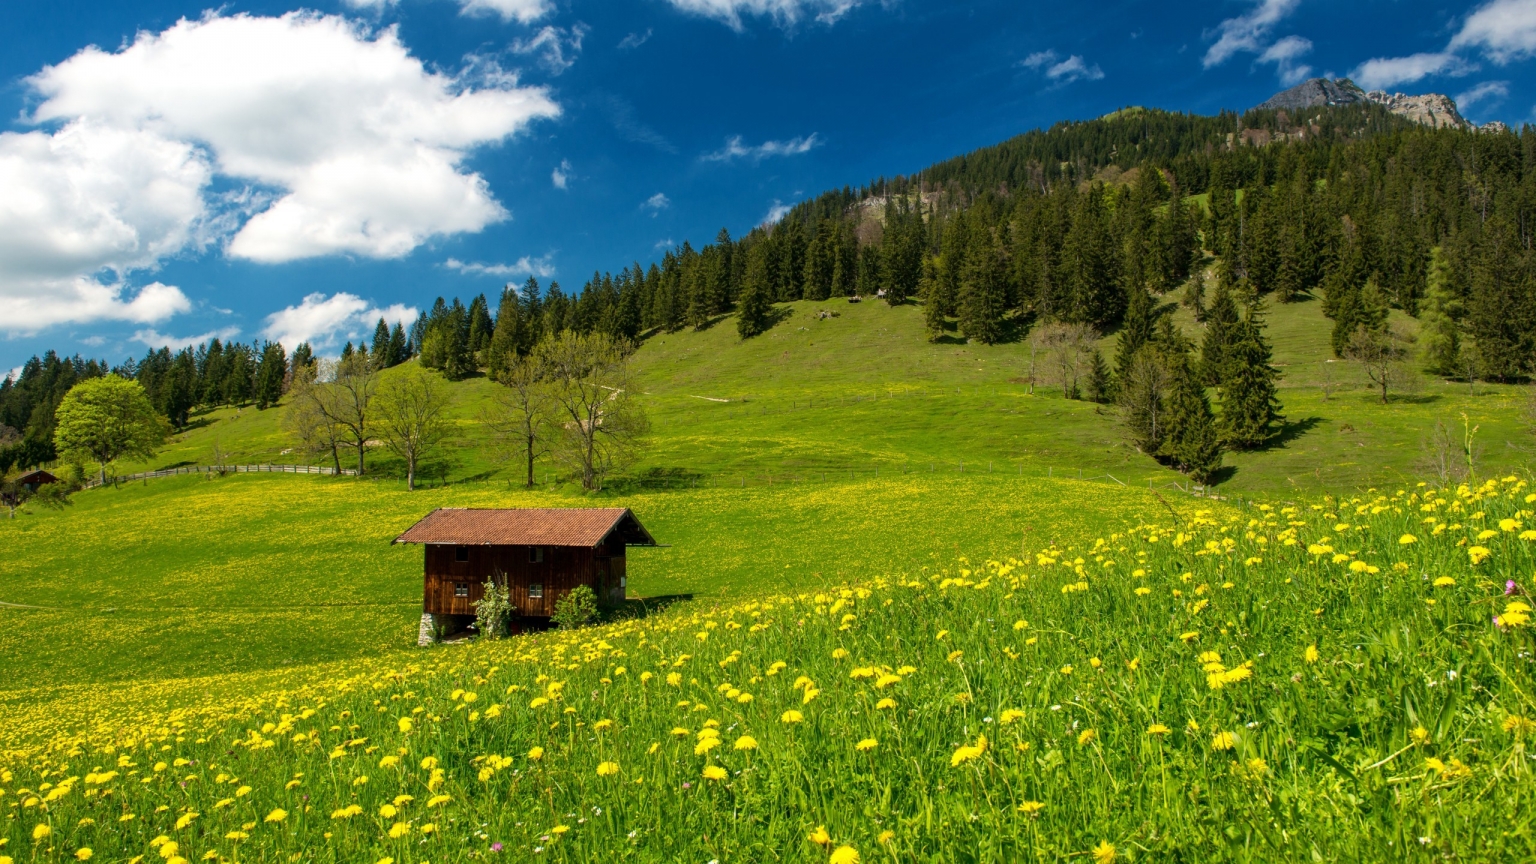 Pasture in the Bavarian Alp for 1536 x 864 HDTV resolution